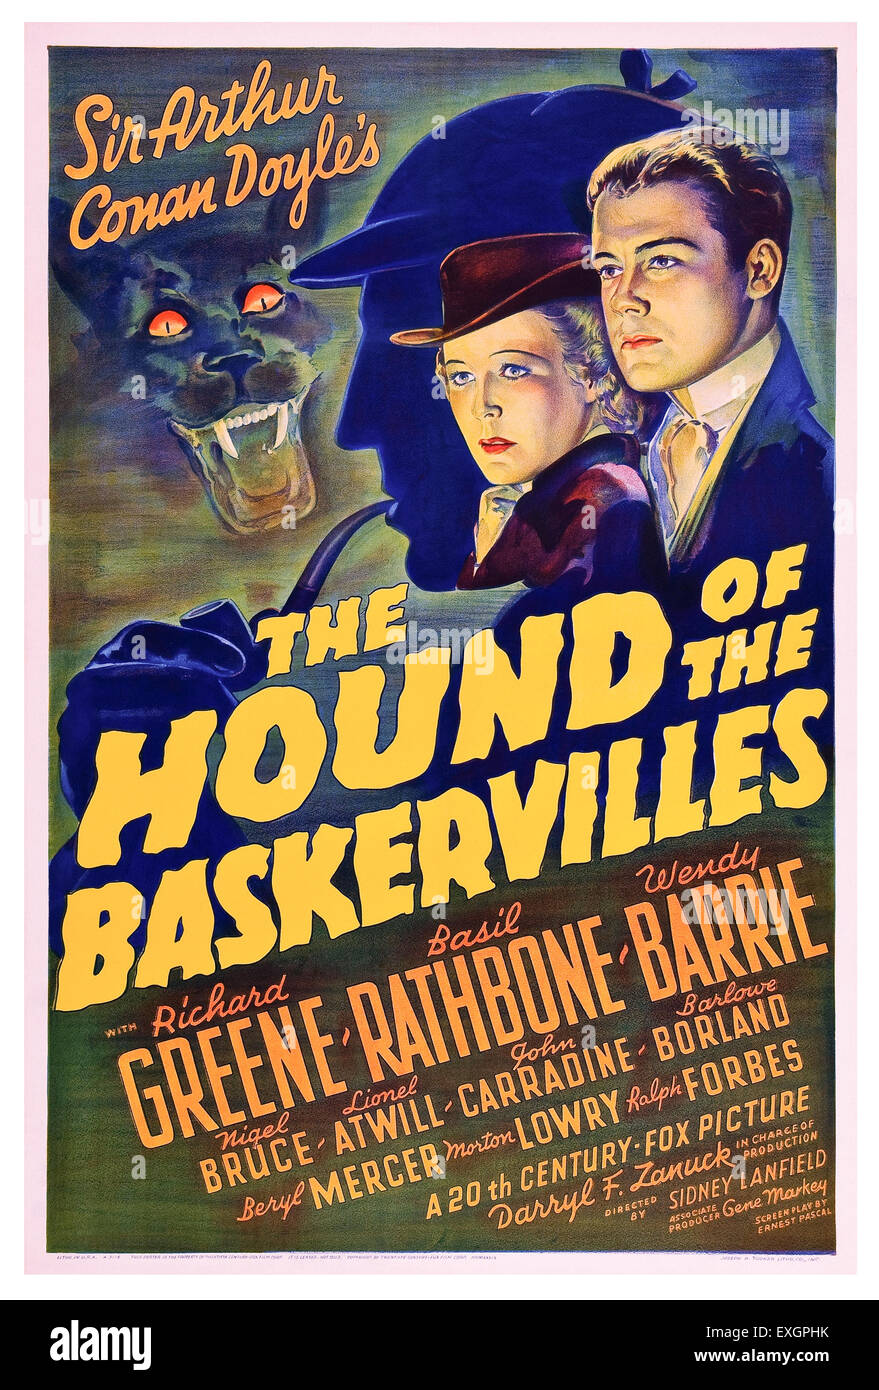 'The Hound of the Baskervilles' 1939 Theatrical Poster for the film directed by Sidney Lanfield and starring Basil Rathbone as Sherlock Holmes. Stock Photo